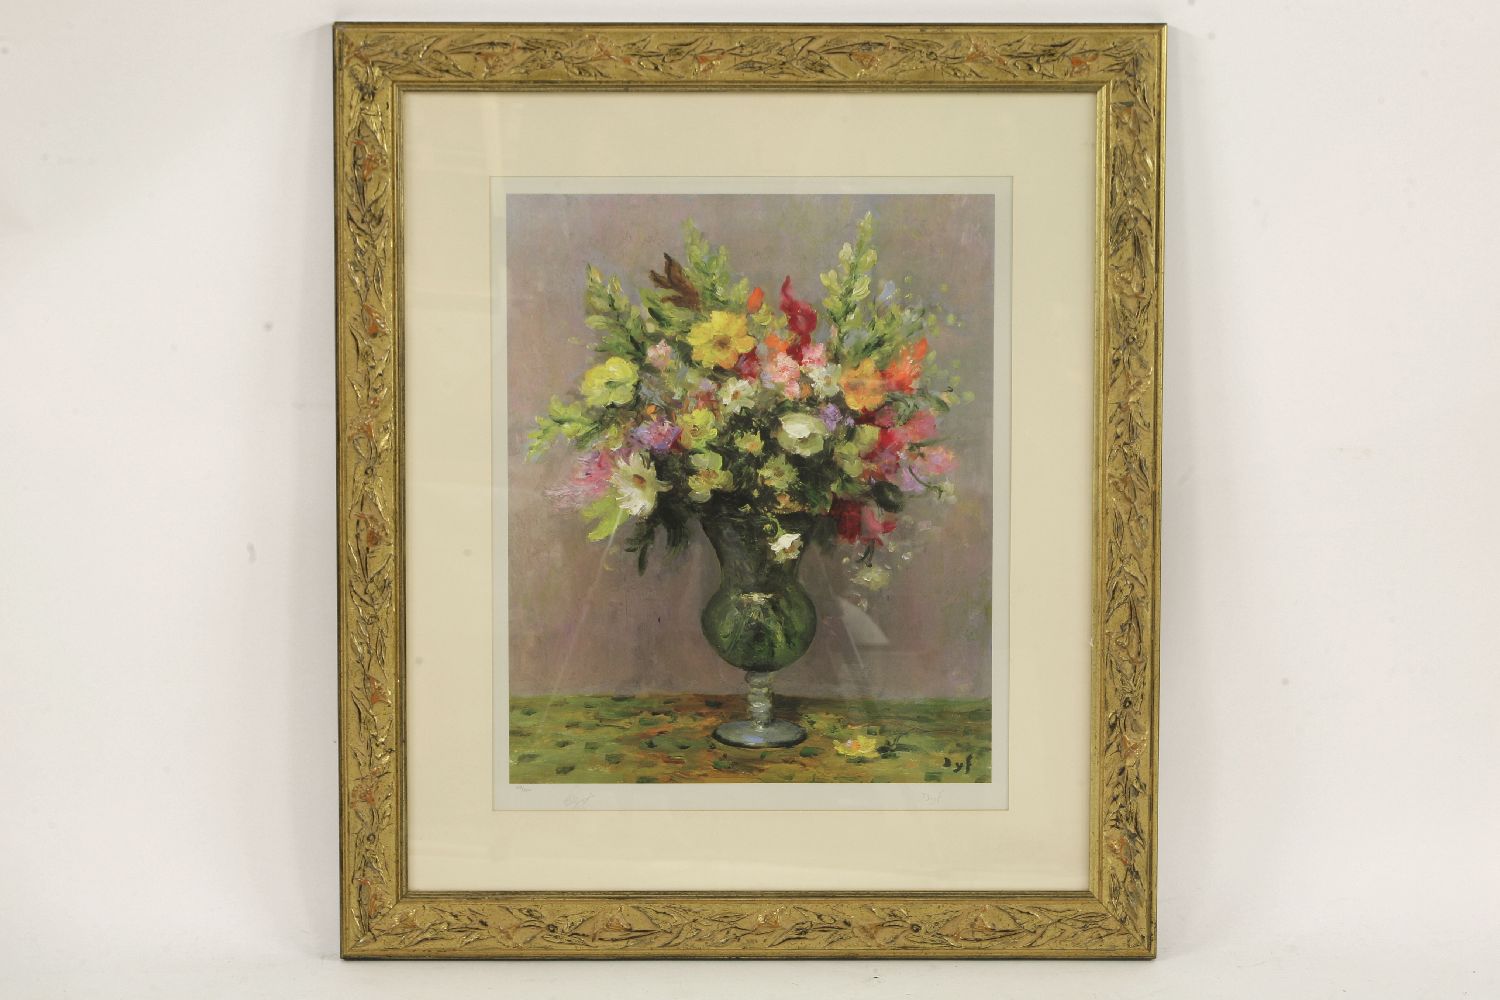 AN ARRANGEMENT OF FLOWERS IN A CLEAR GLASS VASEIndistinctly signed in pencil, l.r., limited